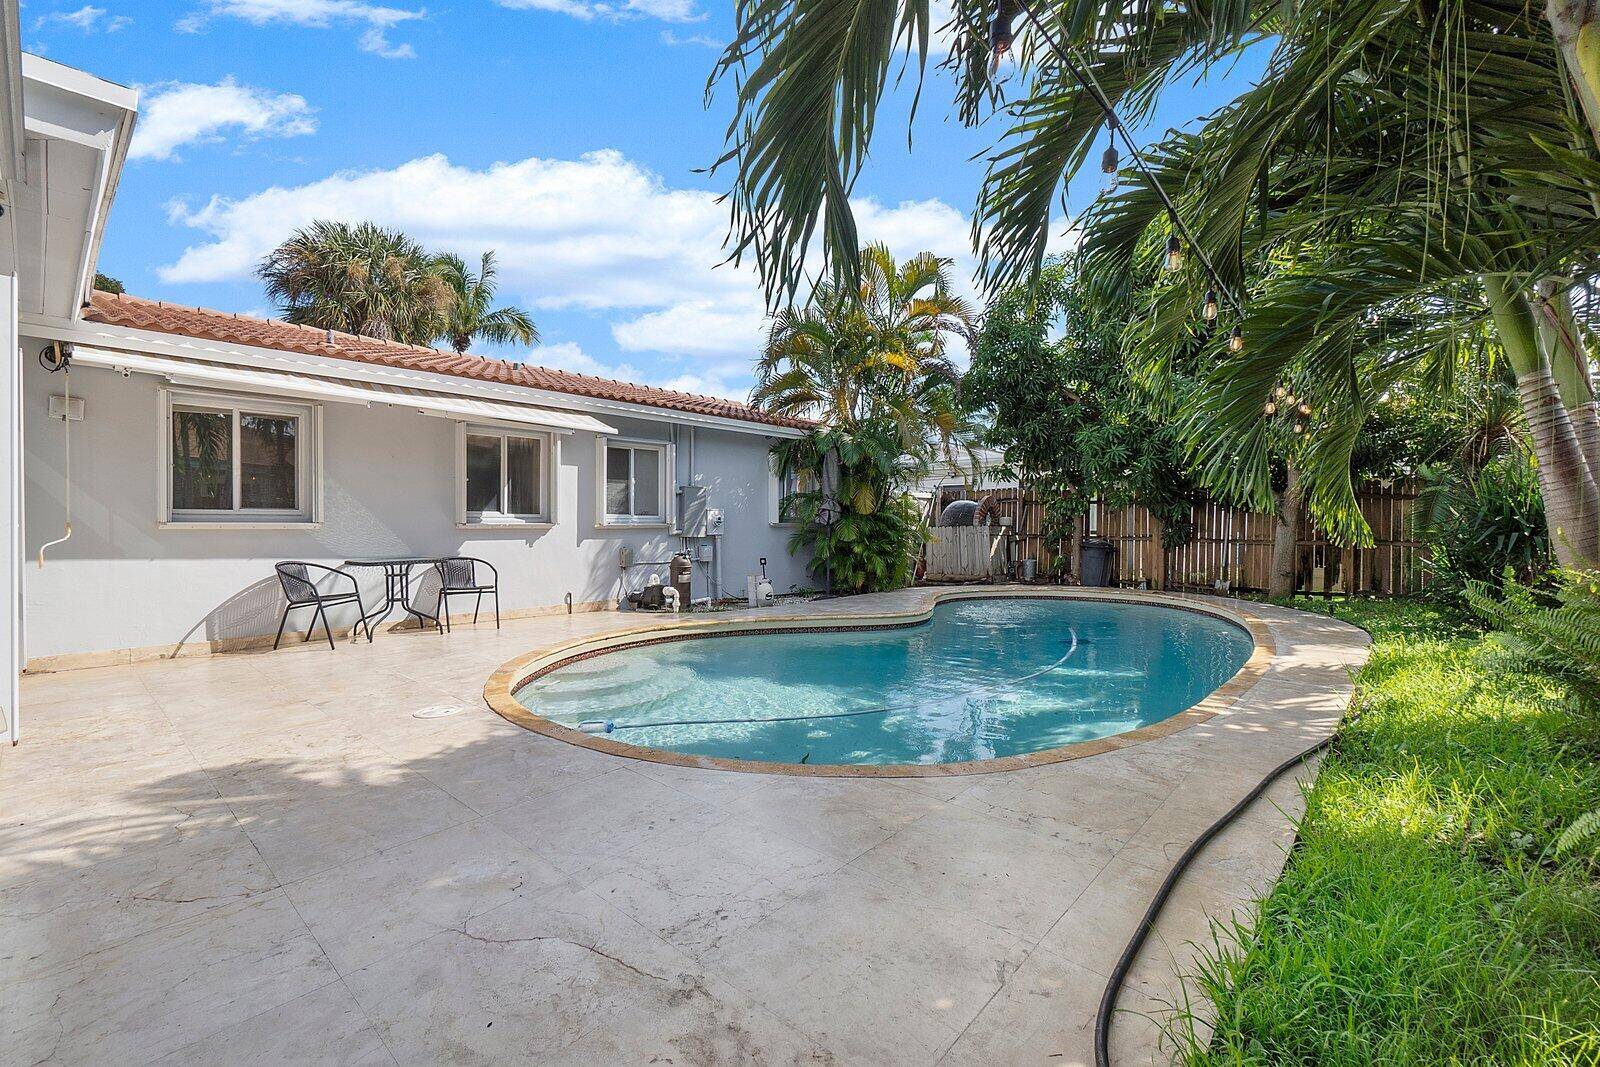 Let me show you this beautiful TURNKEY corner home located within walking distance to Pompano Beach, it features 3 BEDS 3 BATHS 1 CAR GARAGE, a screened patio, a pool ...